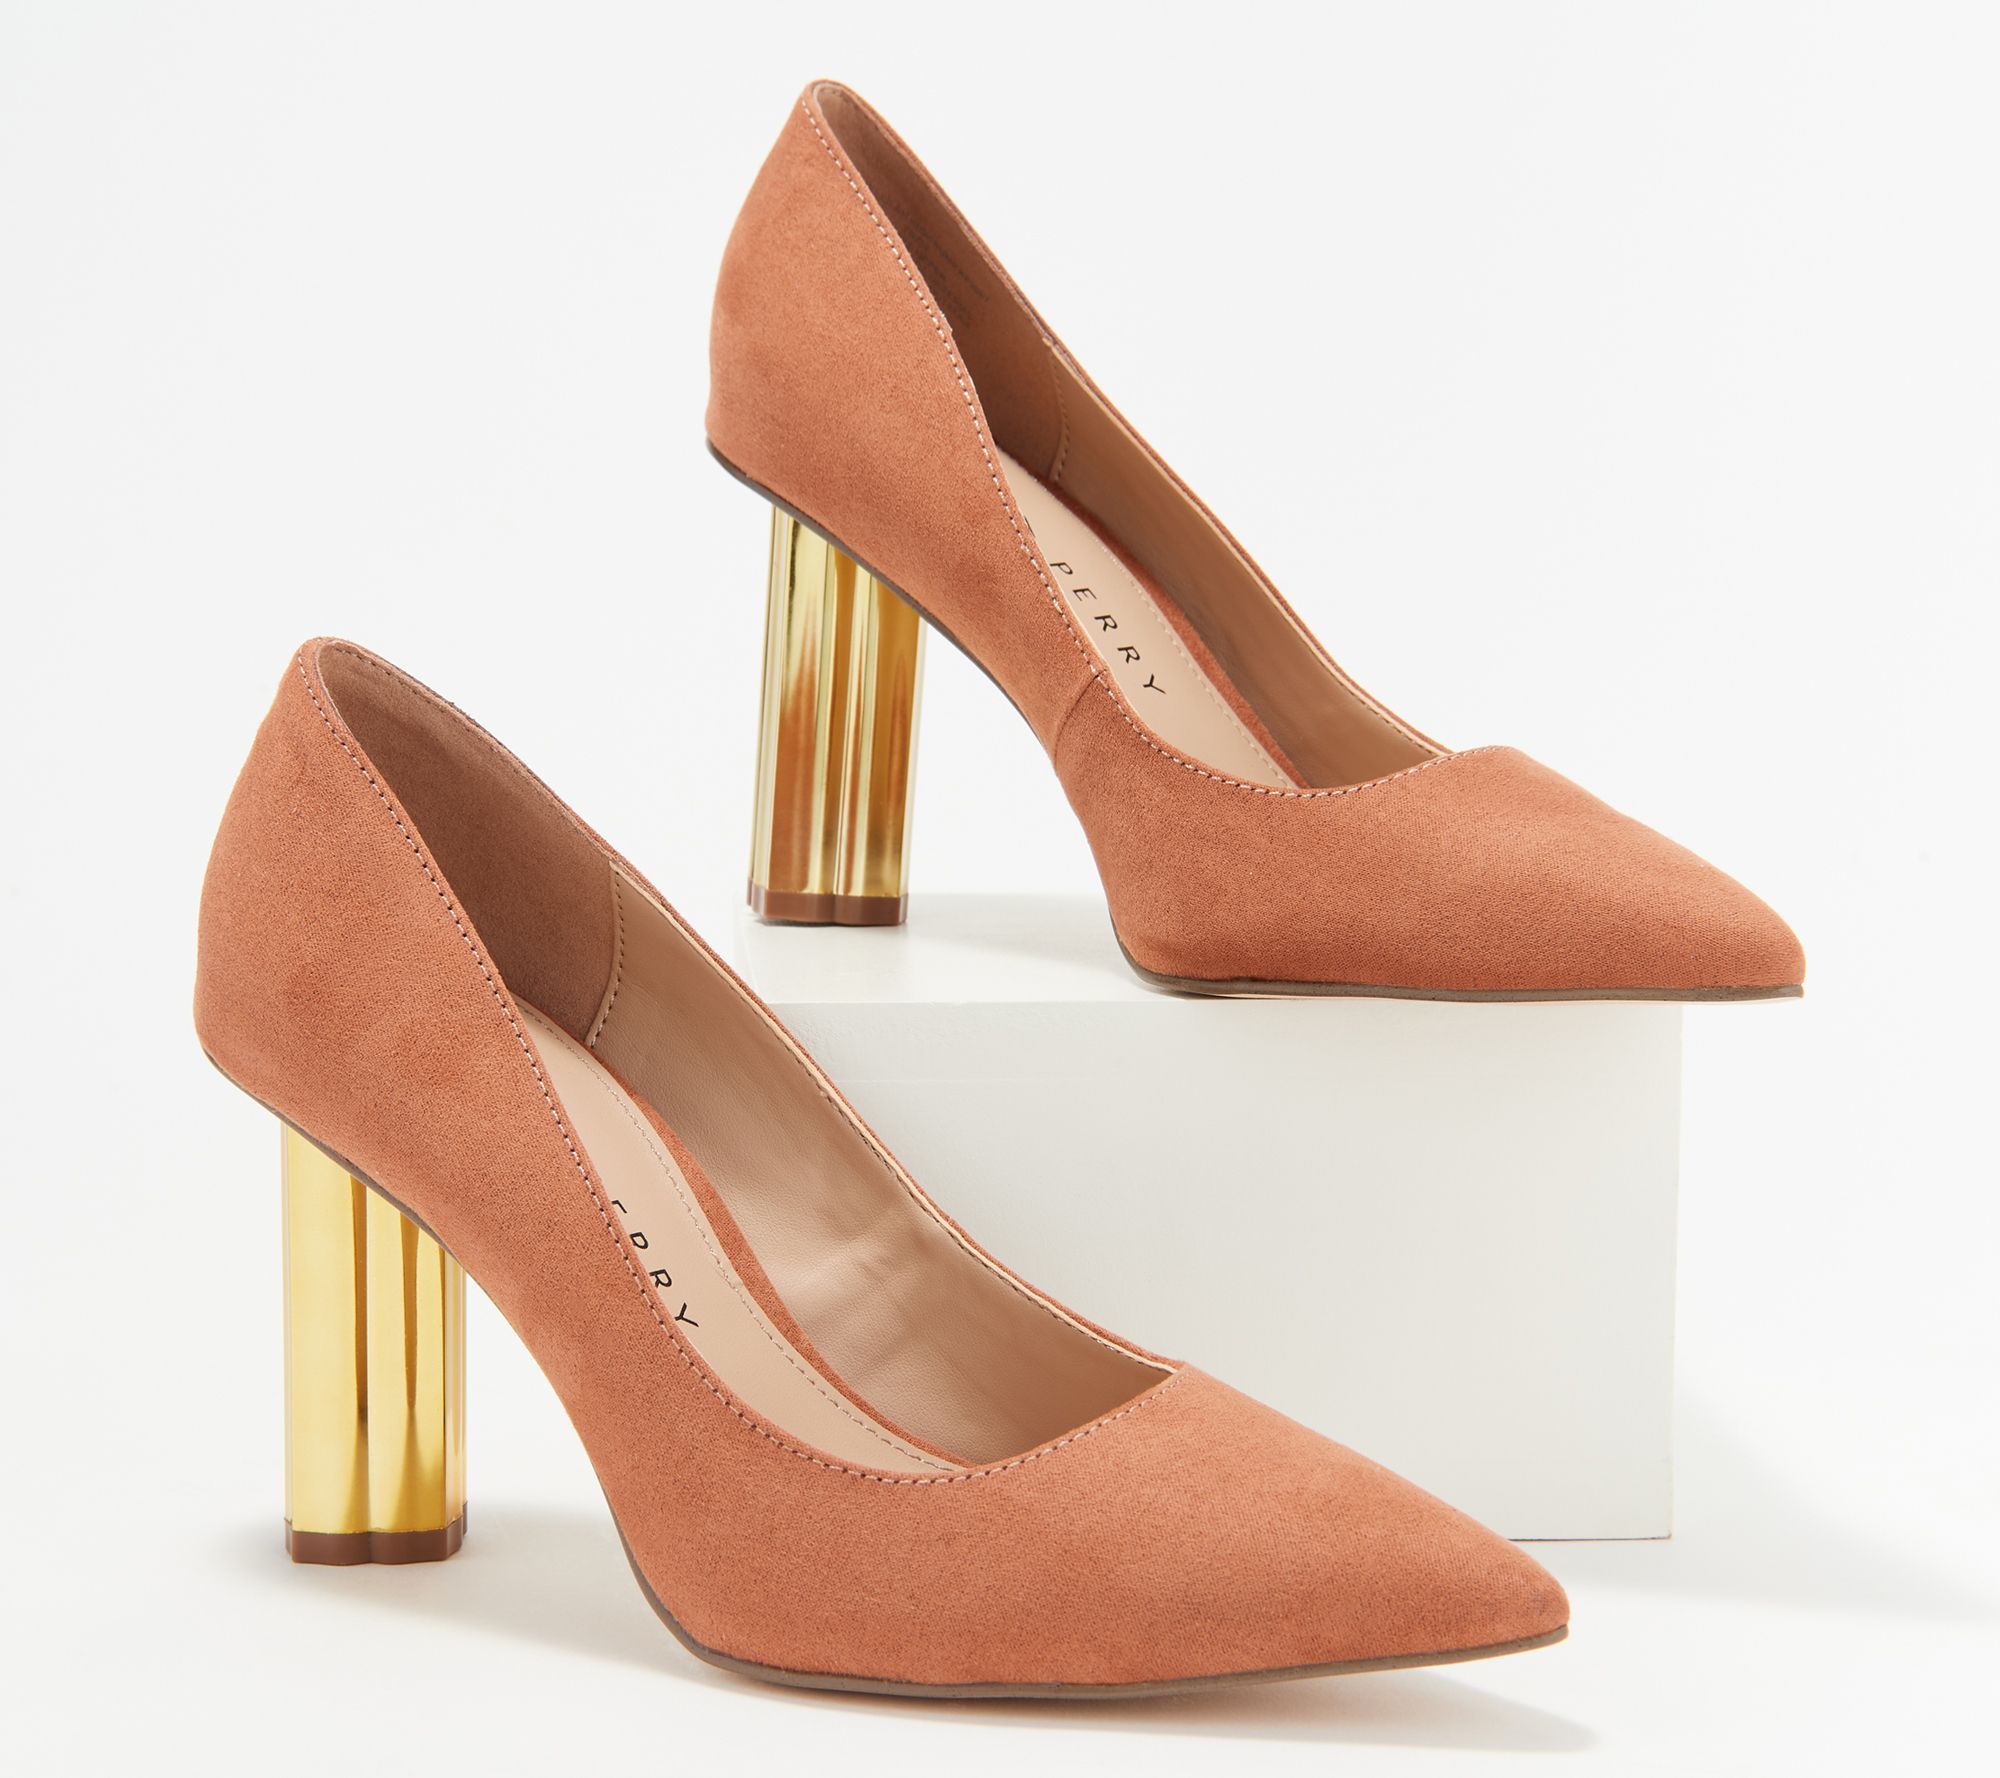 As Is Katy Perry Gold Heeled Pumps - The Delliah 